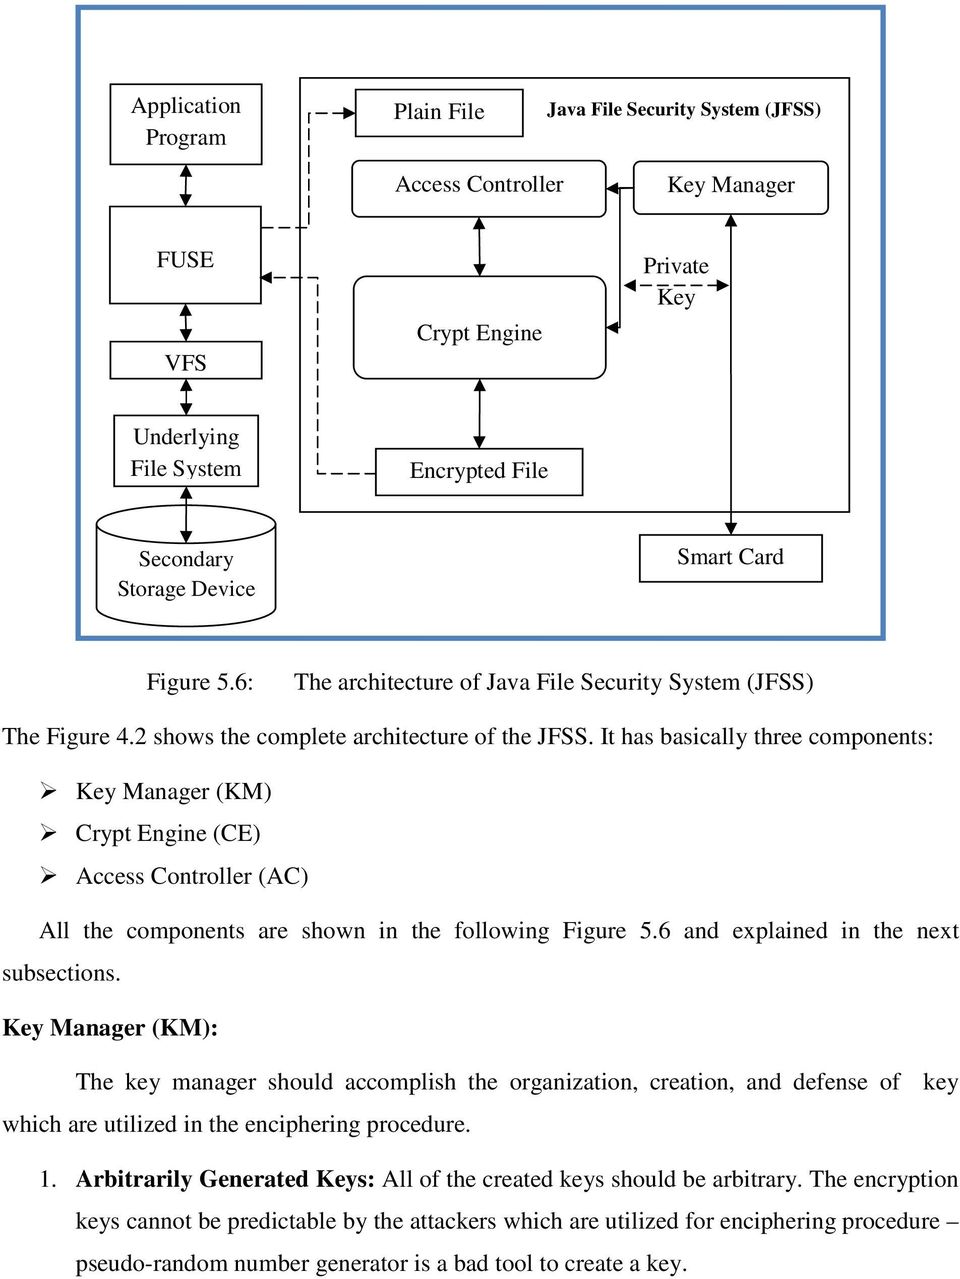 It has basically three components: Key Manager (KM) Crypt Engine (CE) Access Controller (AC) All the components are shown in the following Figure 5.6 and explained in the next subsections.